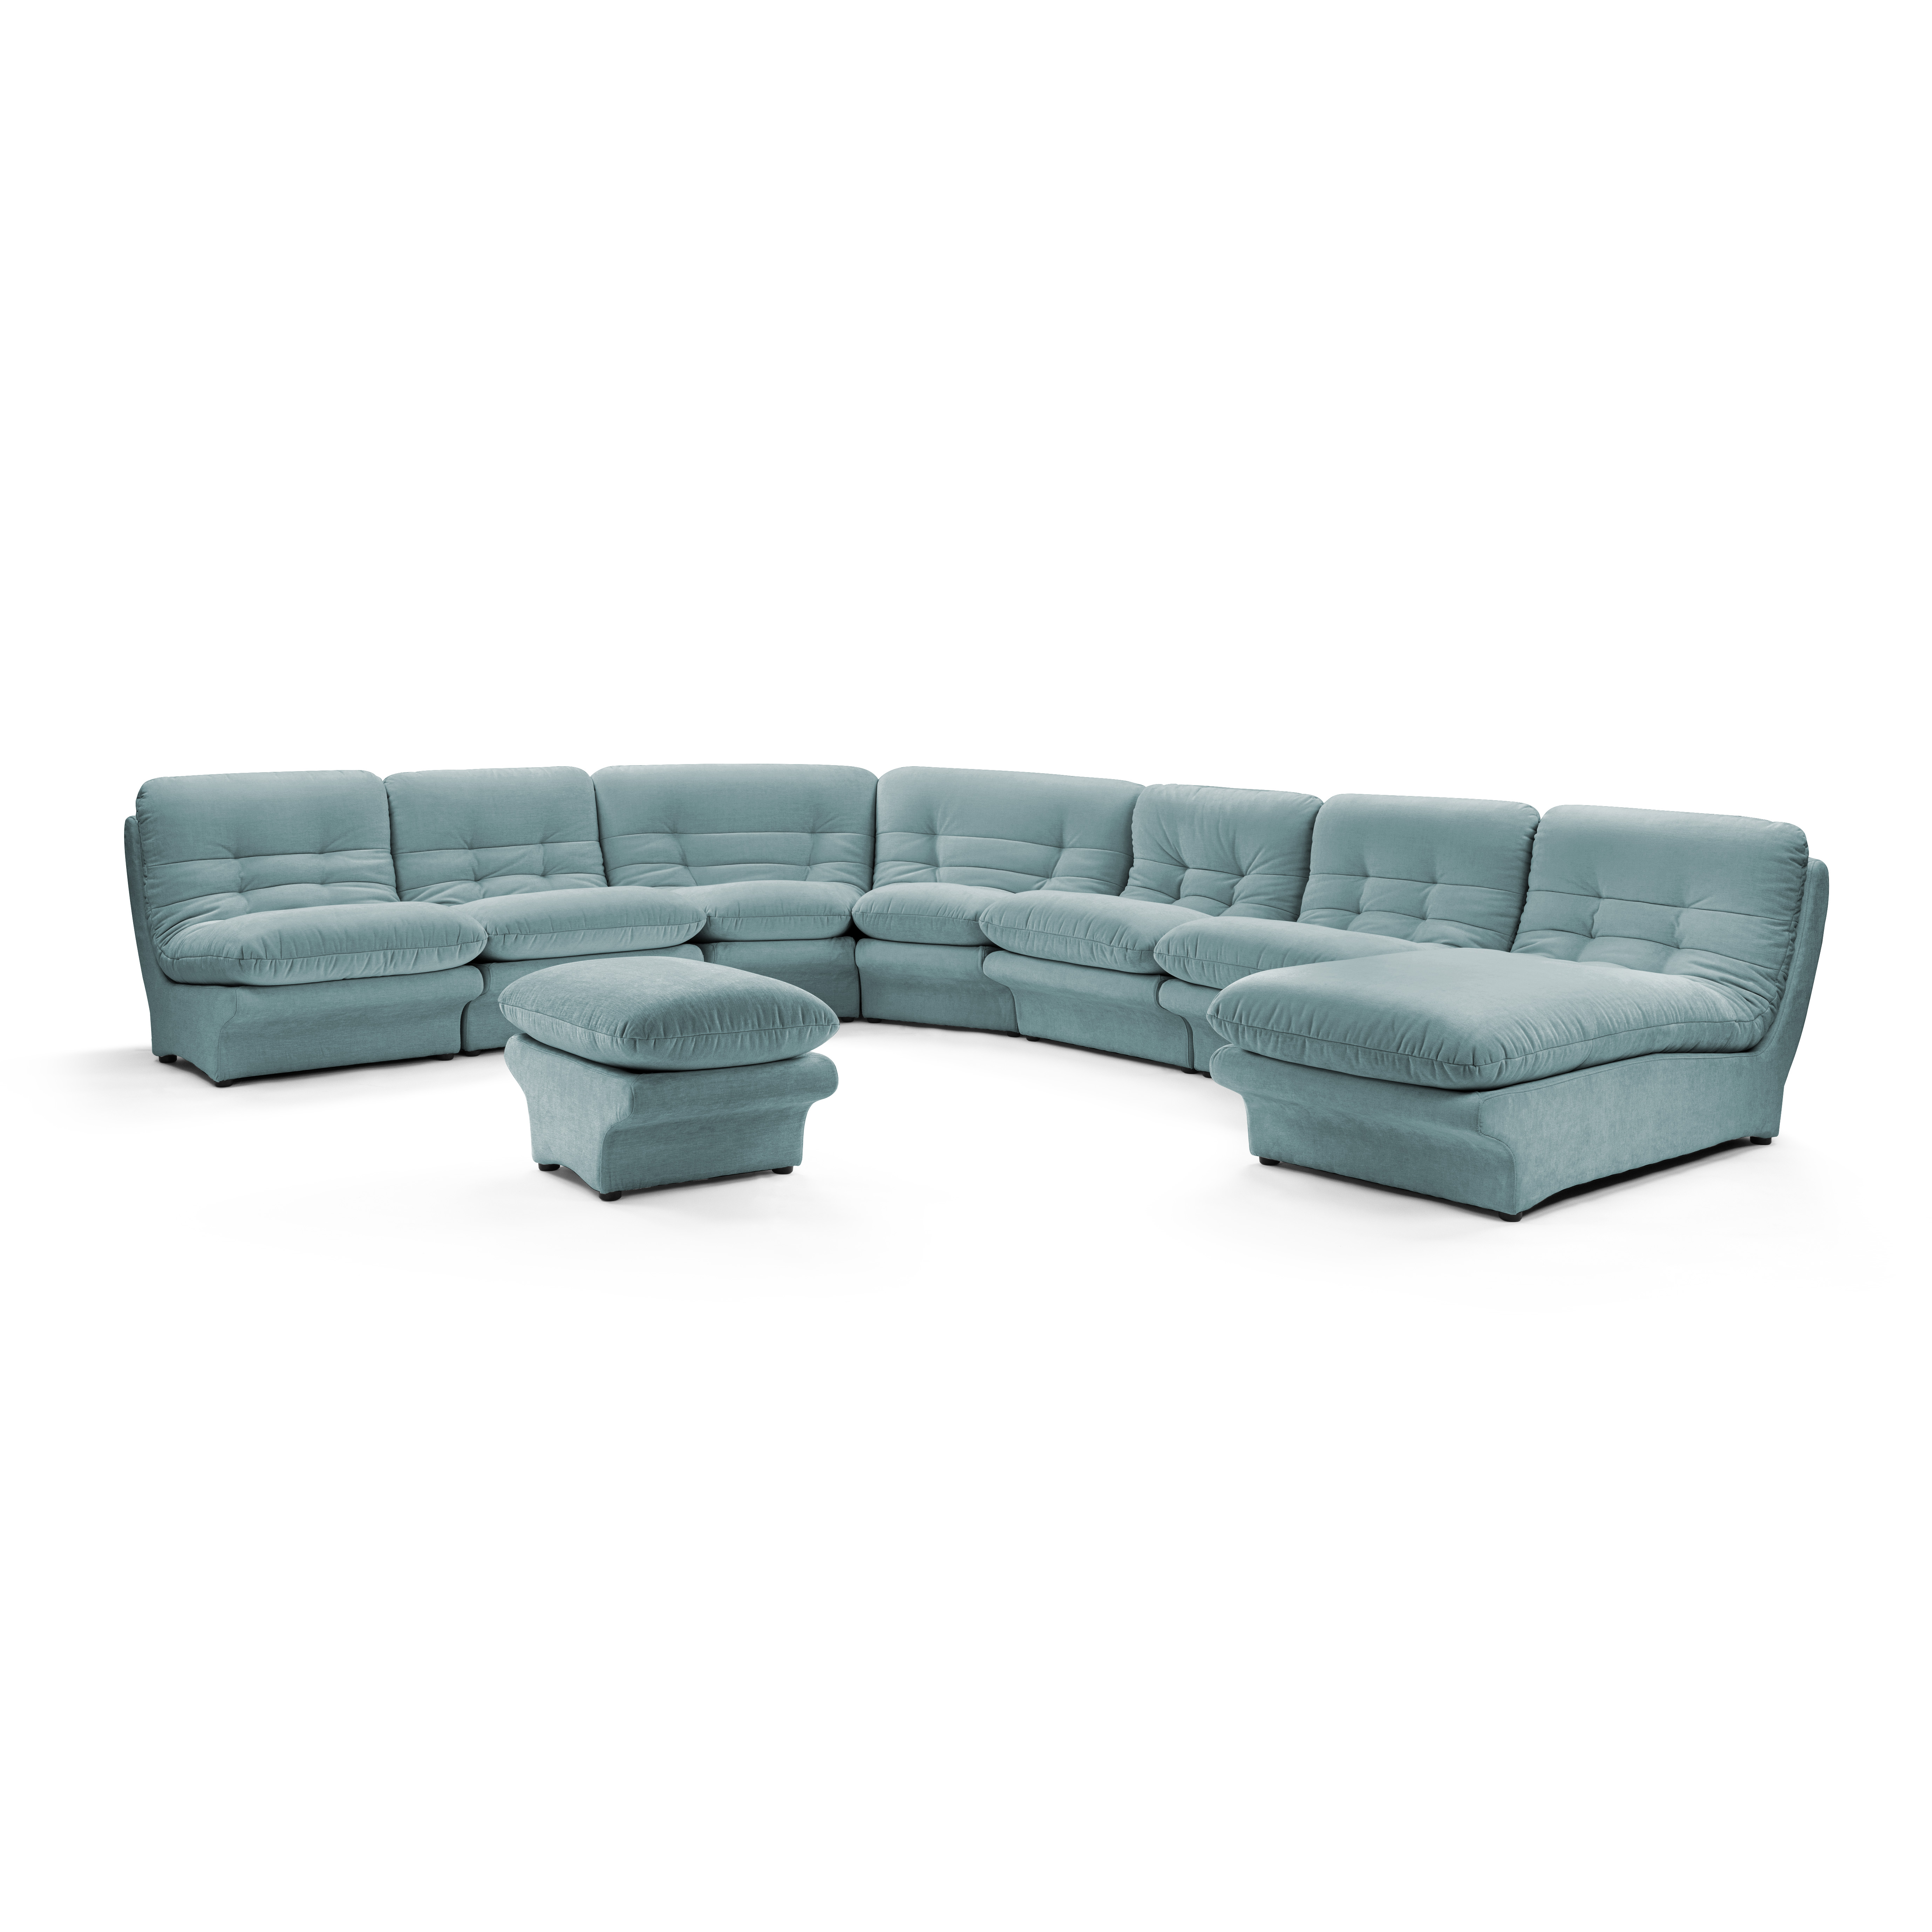 Carsons Mid Century Curved Modular Sectional Sofa / Combination 001-Chenille Helios-Cerulean Blue